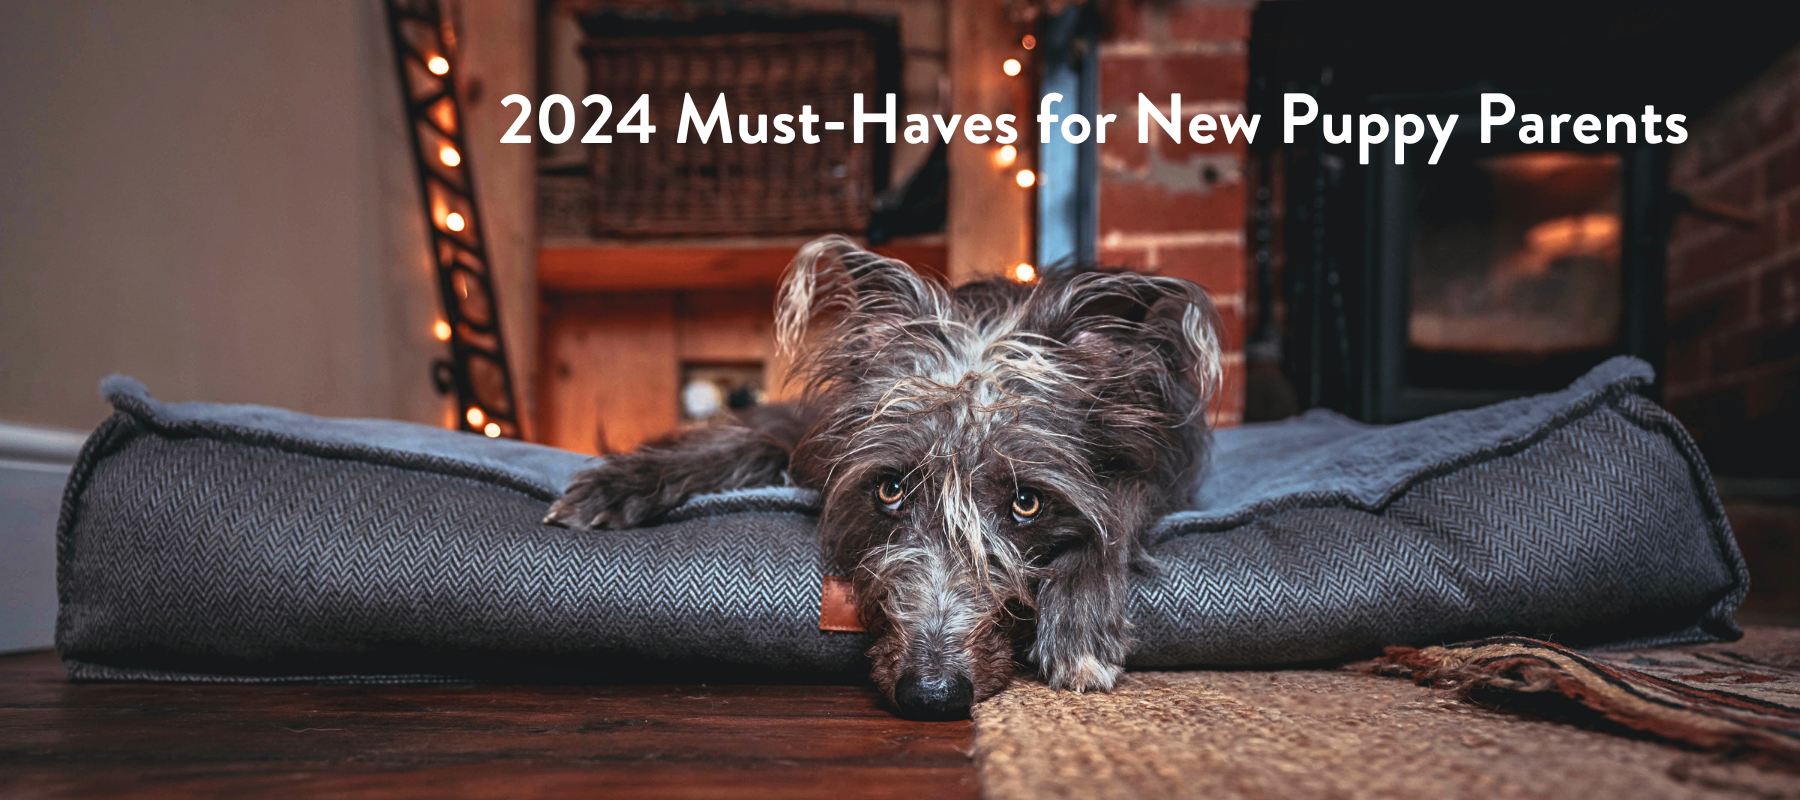 Must-Haves for New Puppy Parents in 2024